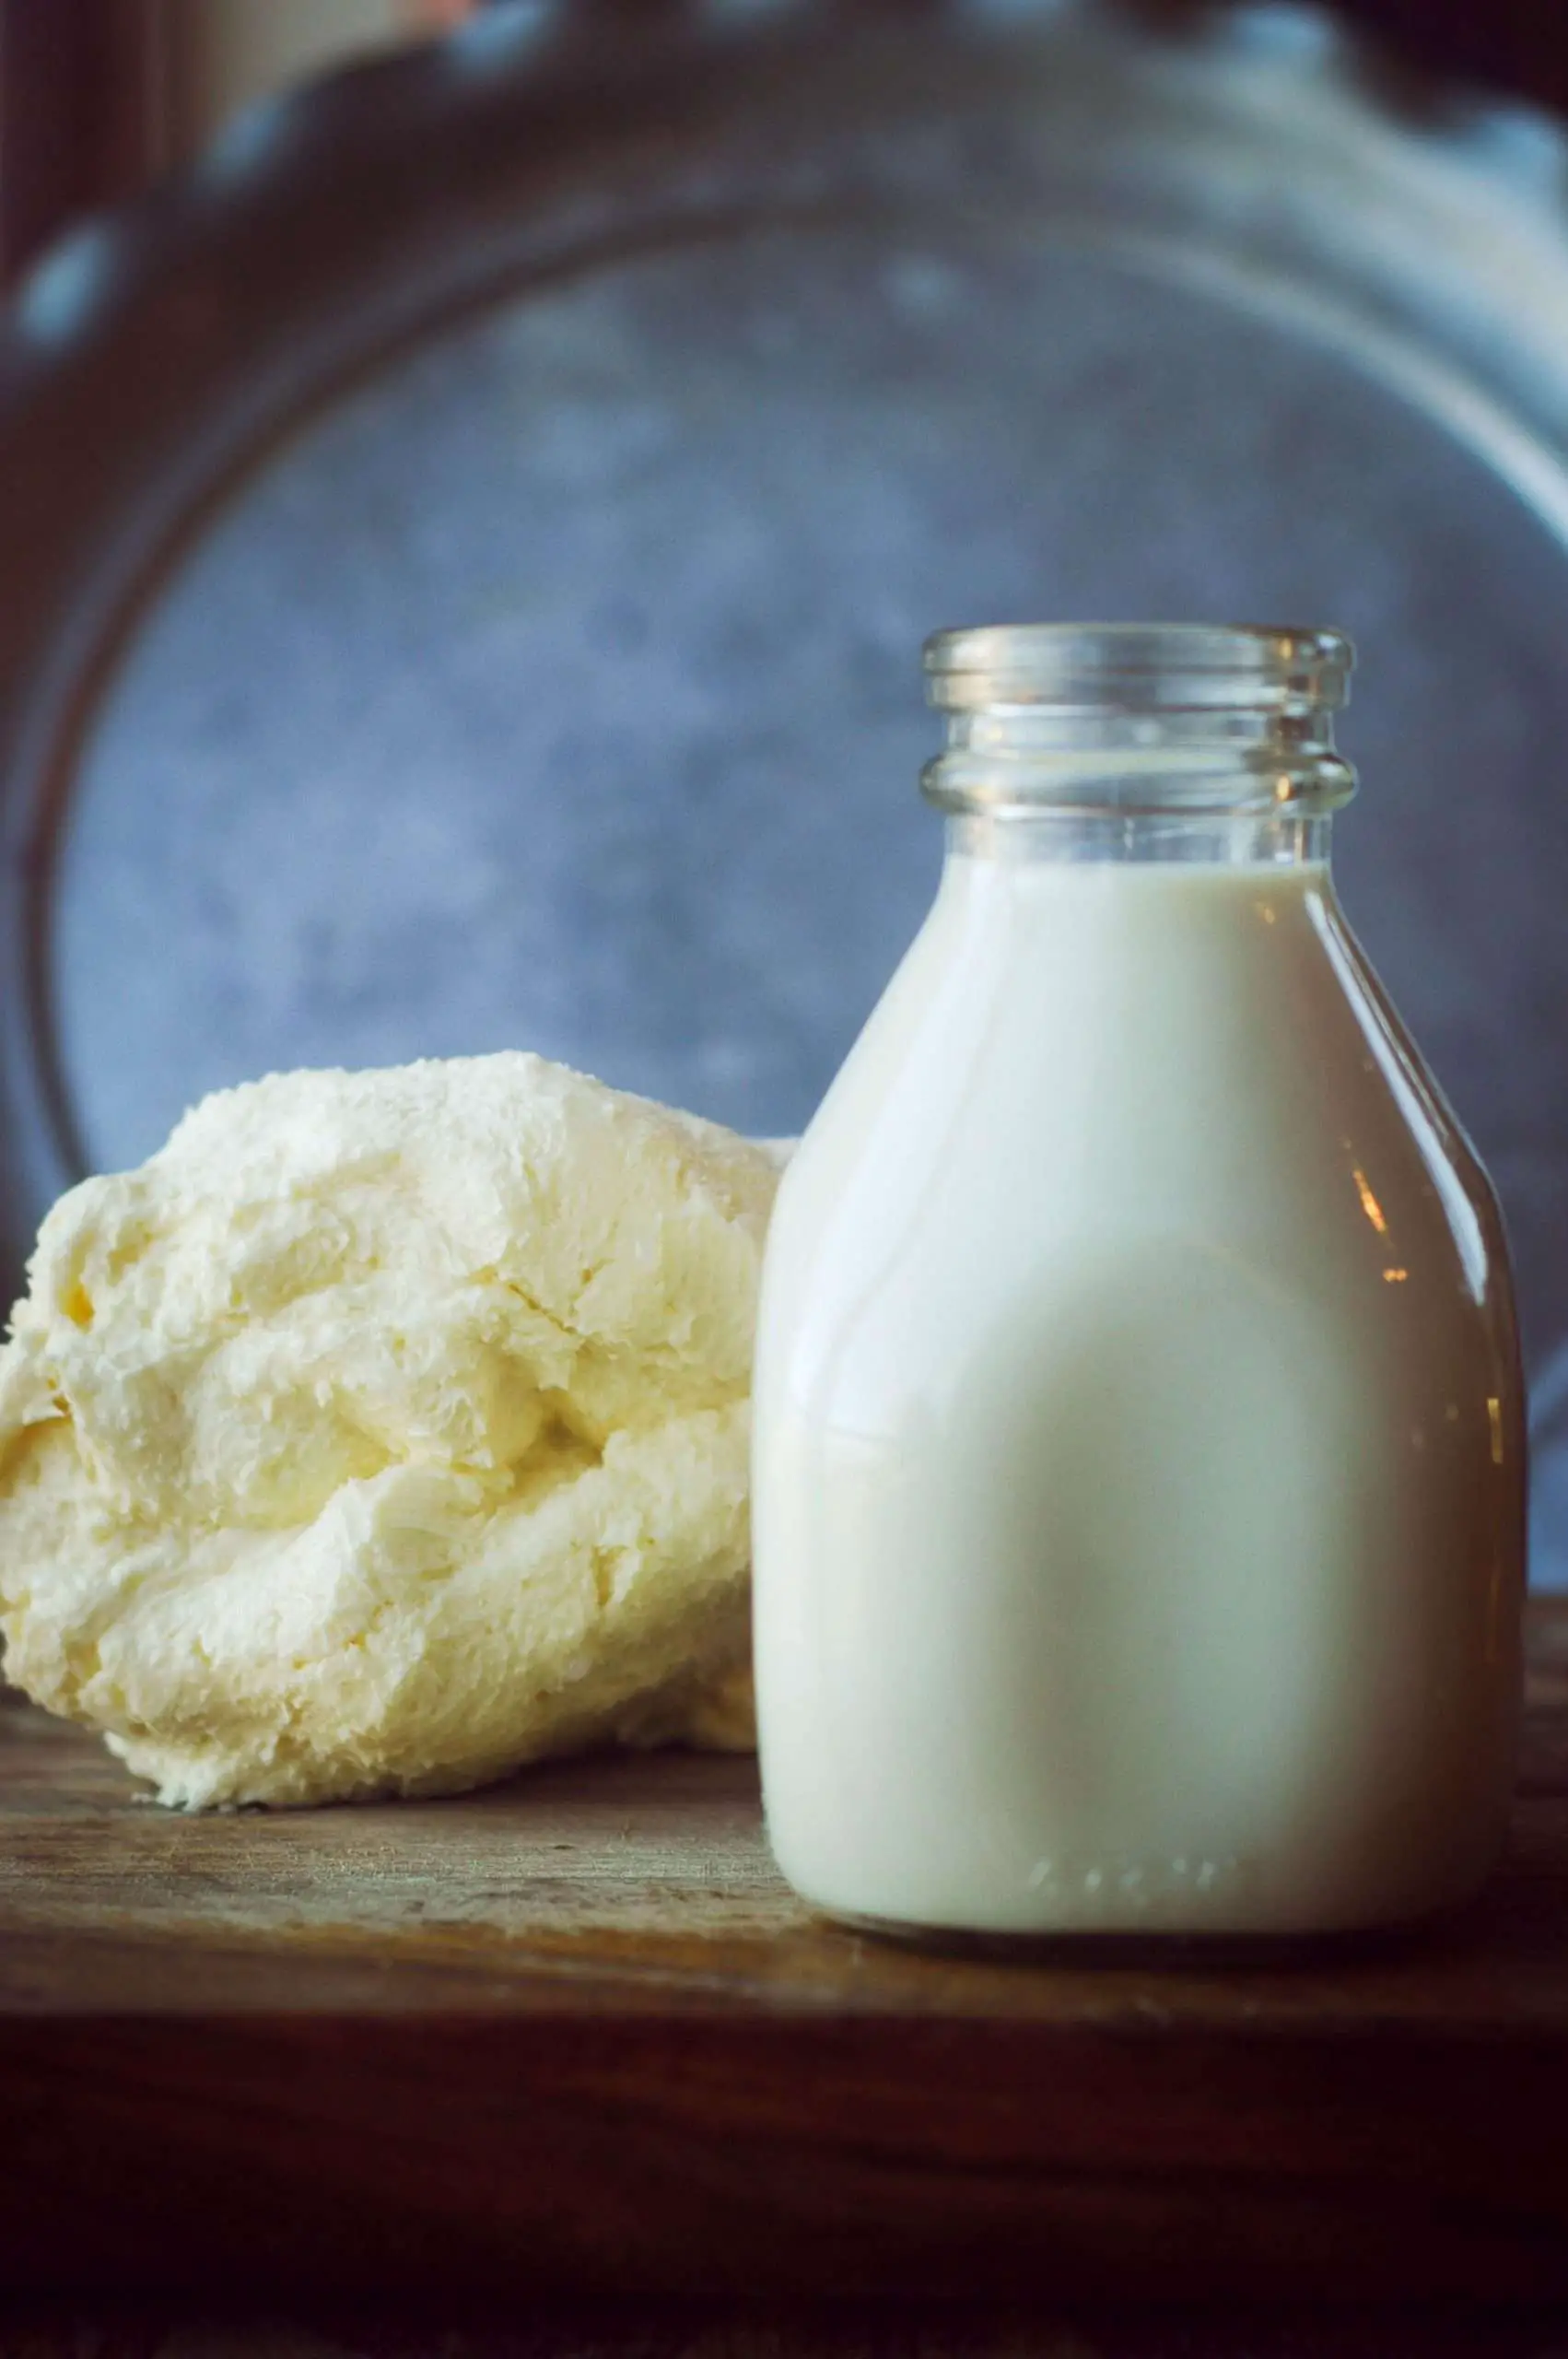 Buttermilk: What it is, why it